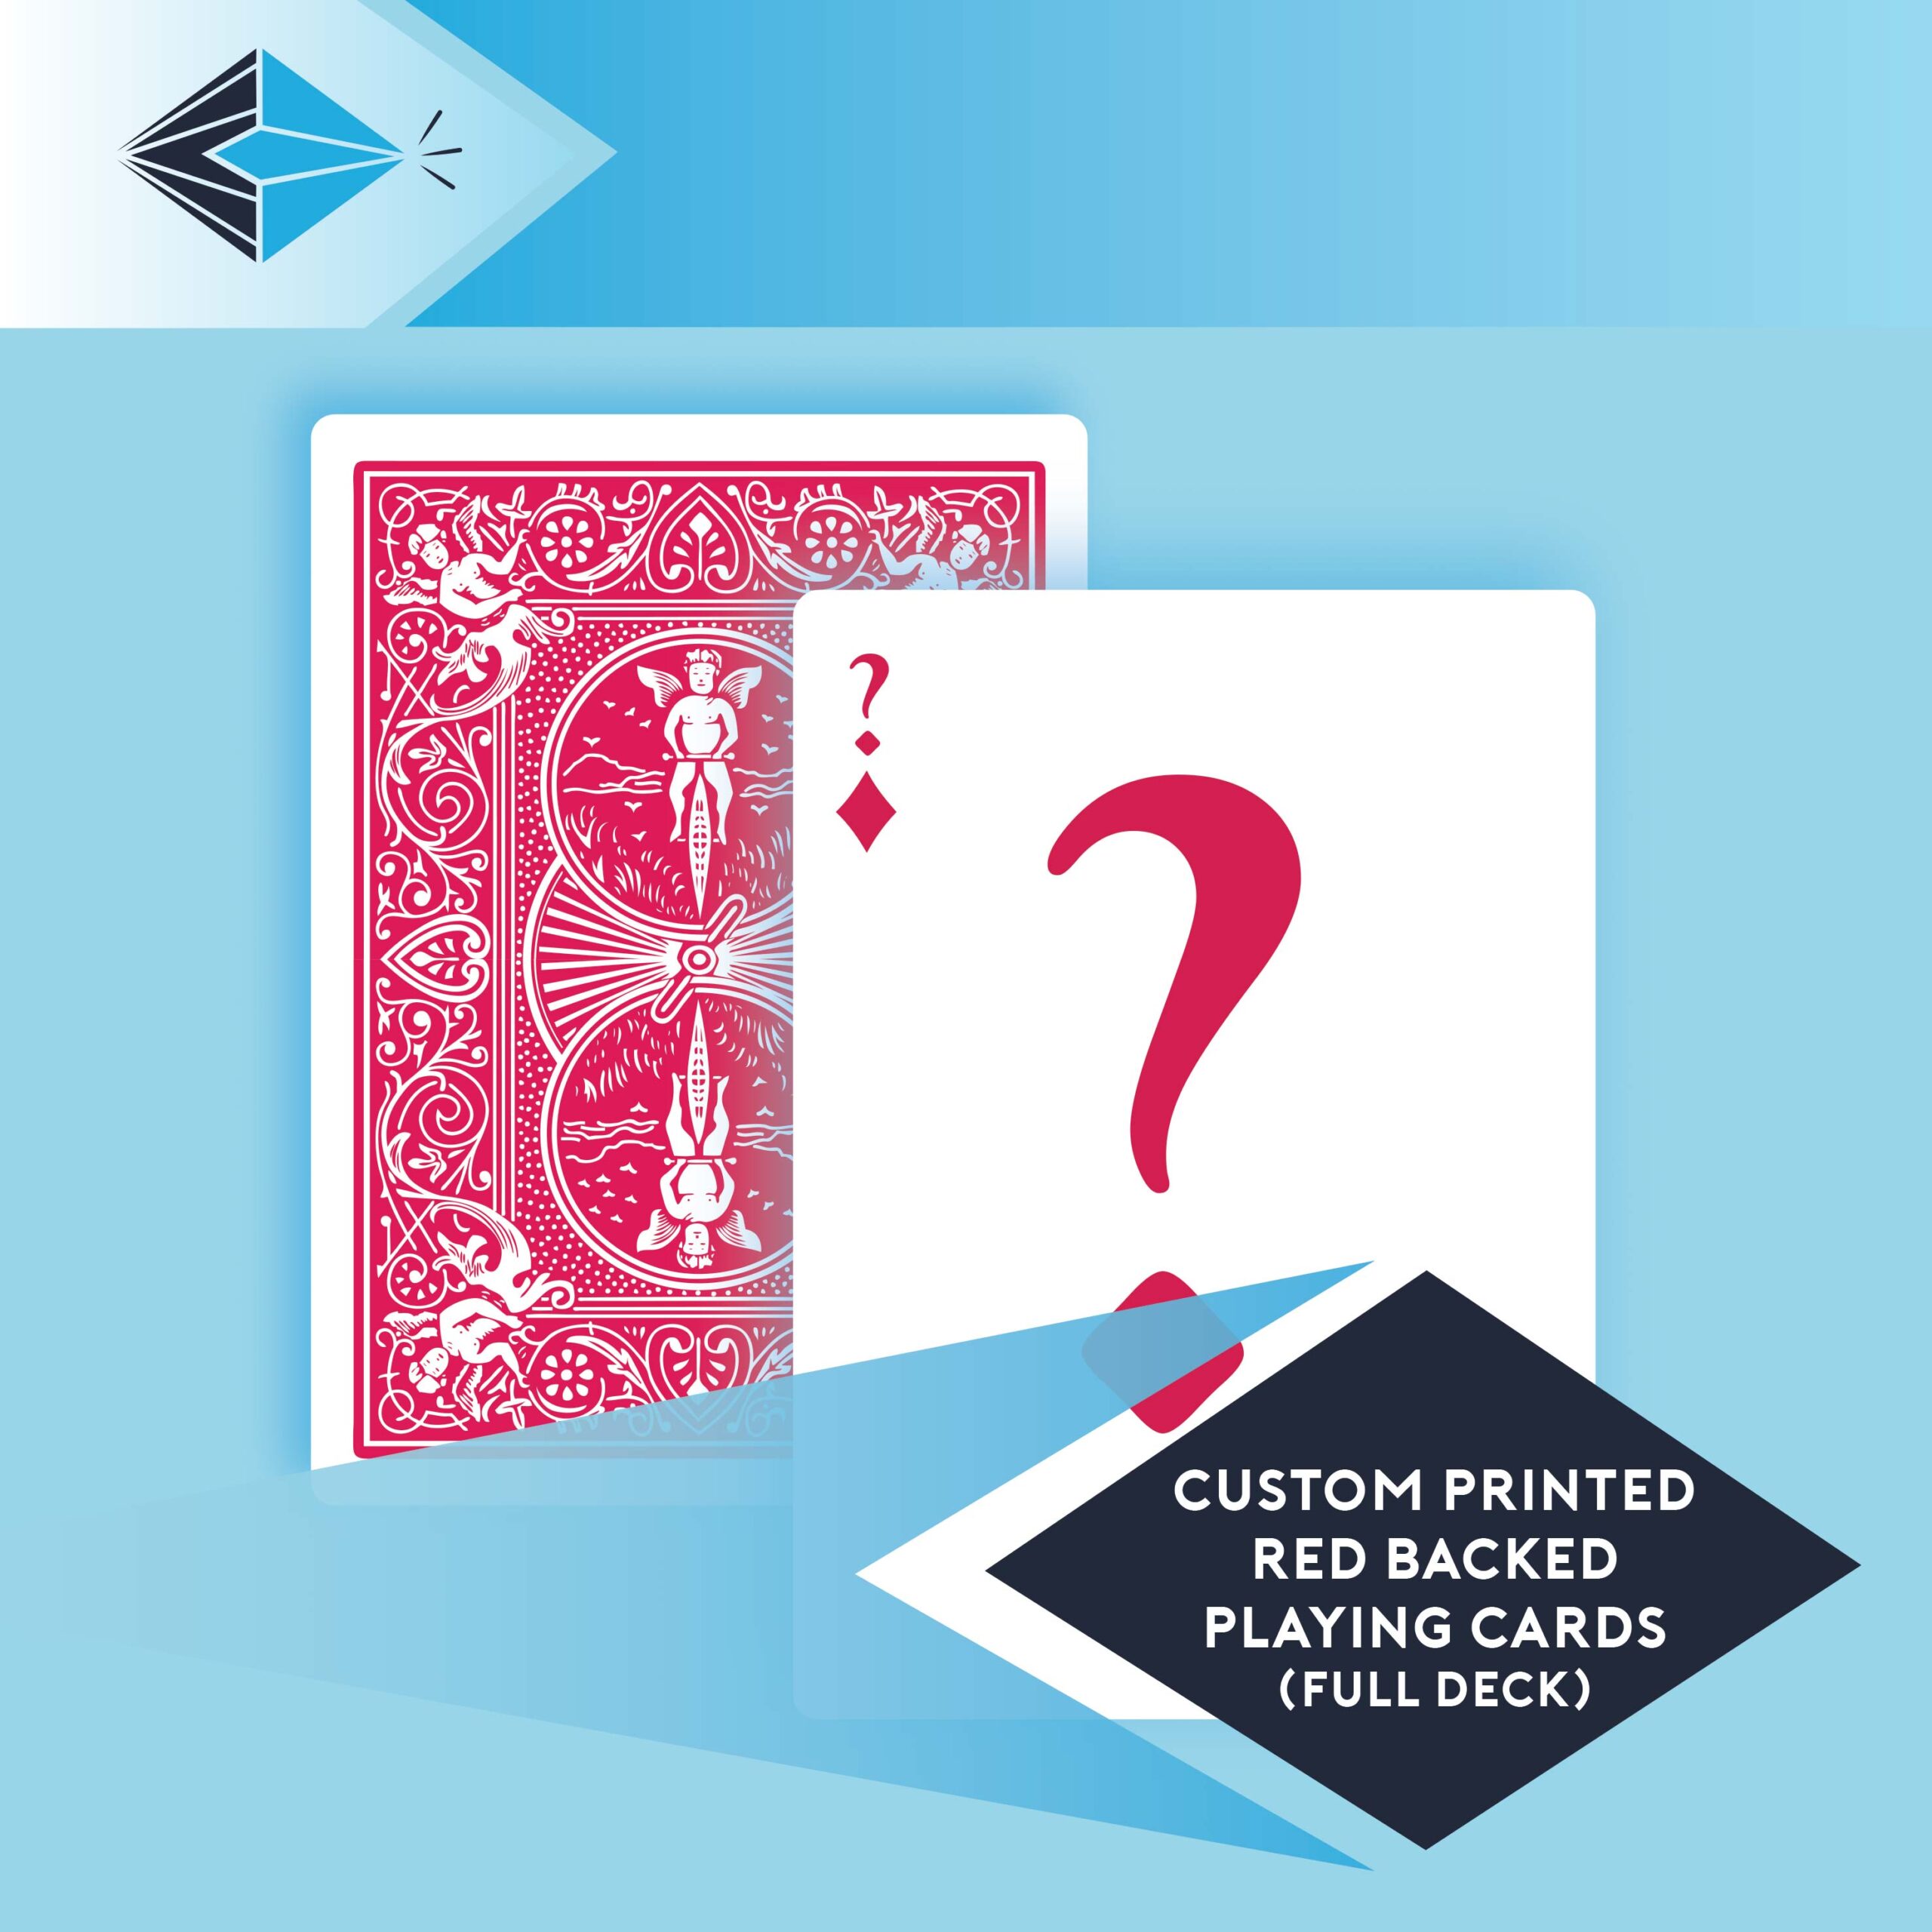 CUSTOM QUOTE - Printed Playing Cards